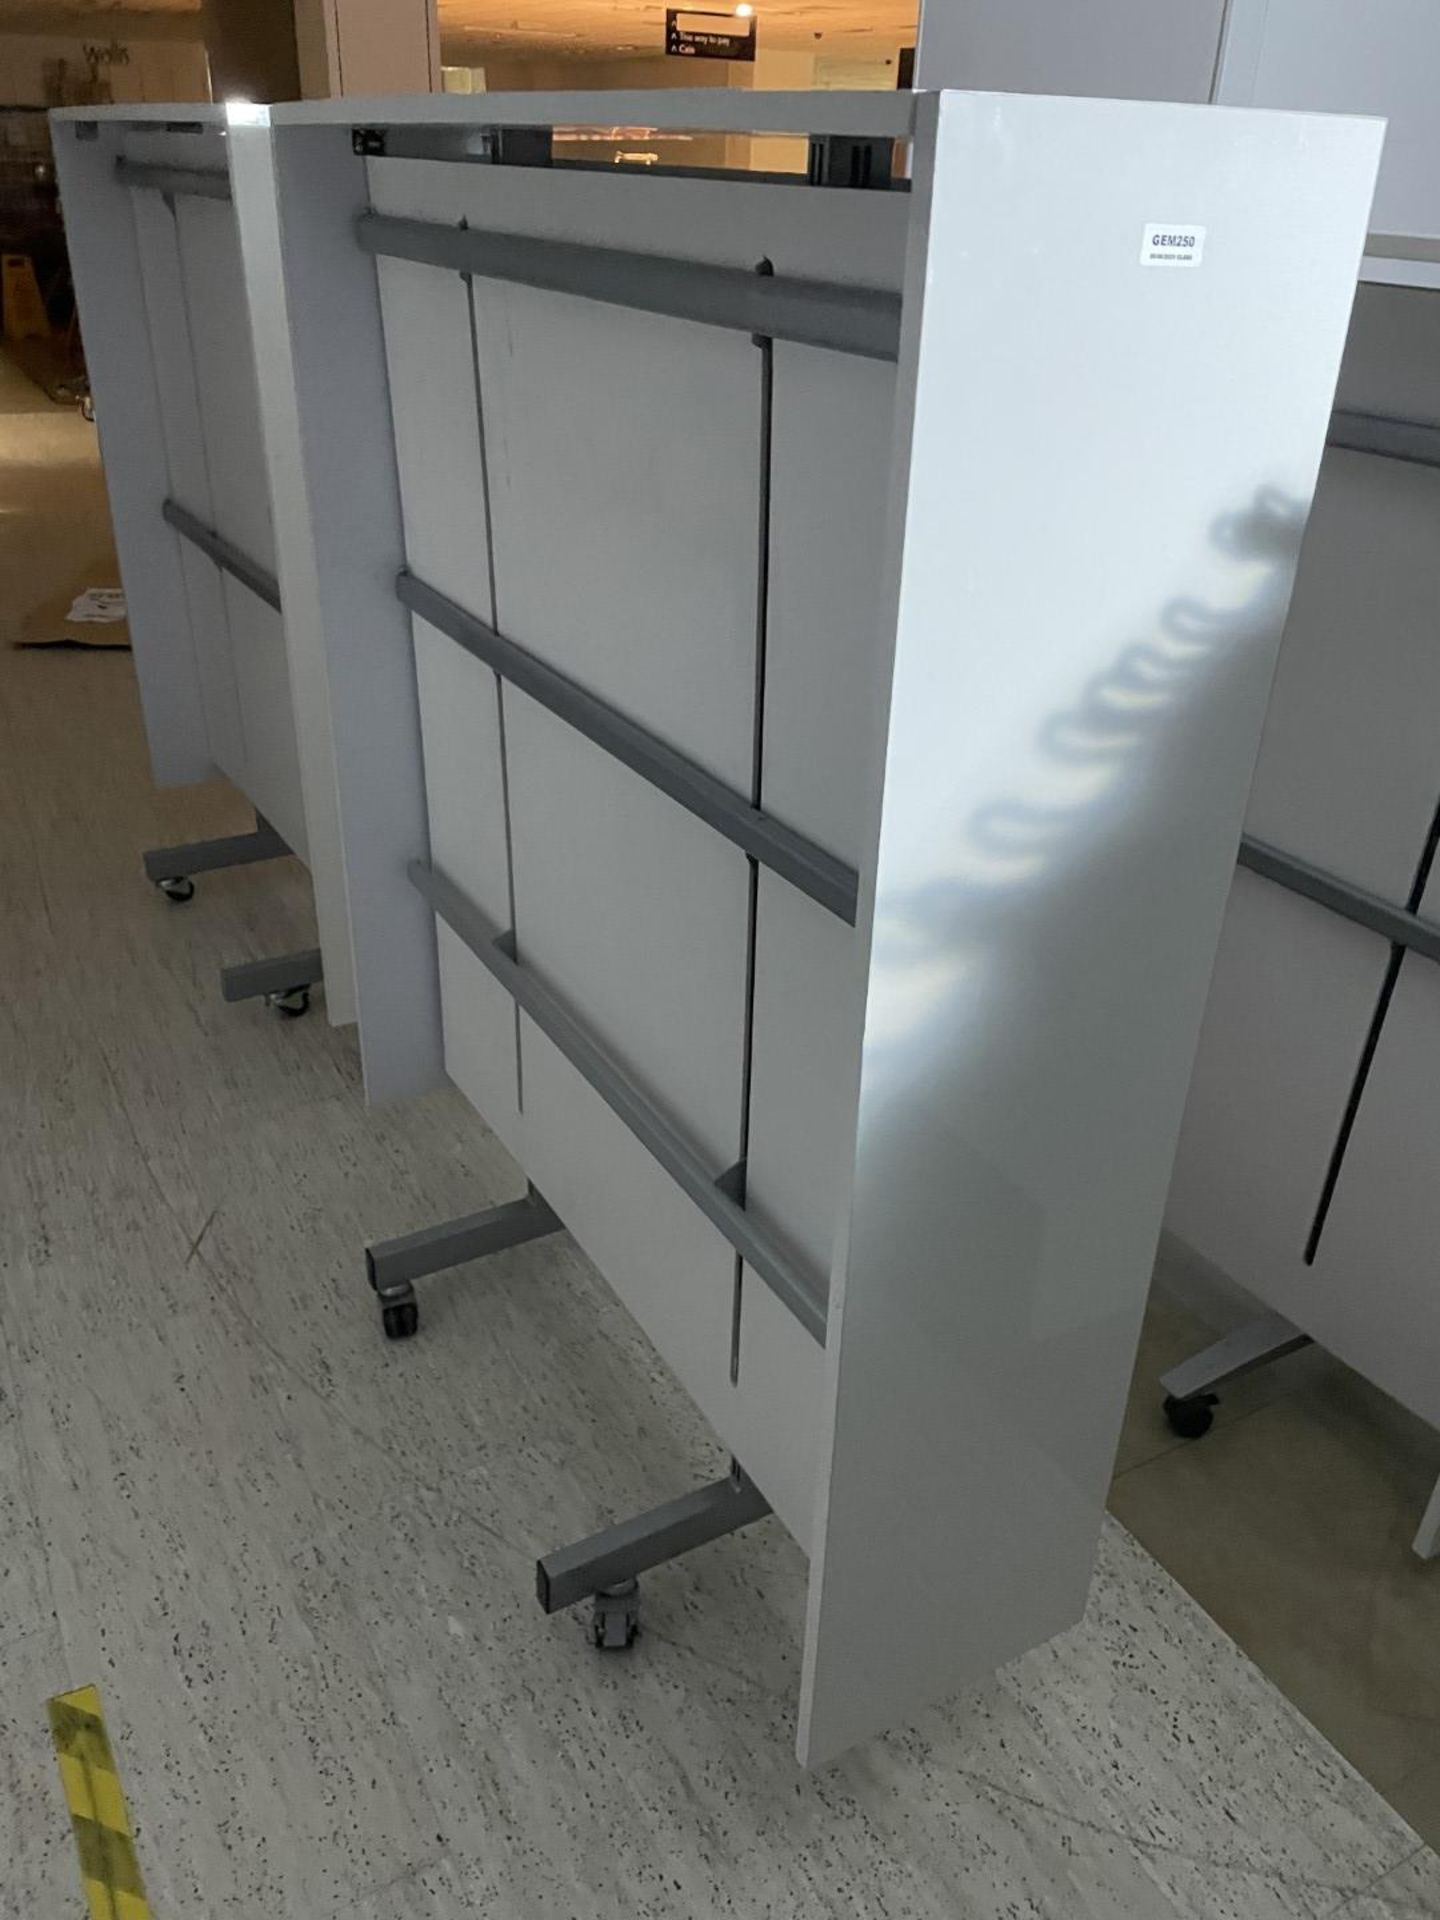 2 x Freestanding Retail Clothes Display Stands - CL670 - Ref: GEM250 - Location: Gravesend, DA11 - Image 3 of 4